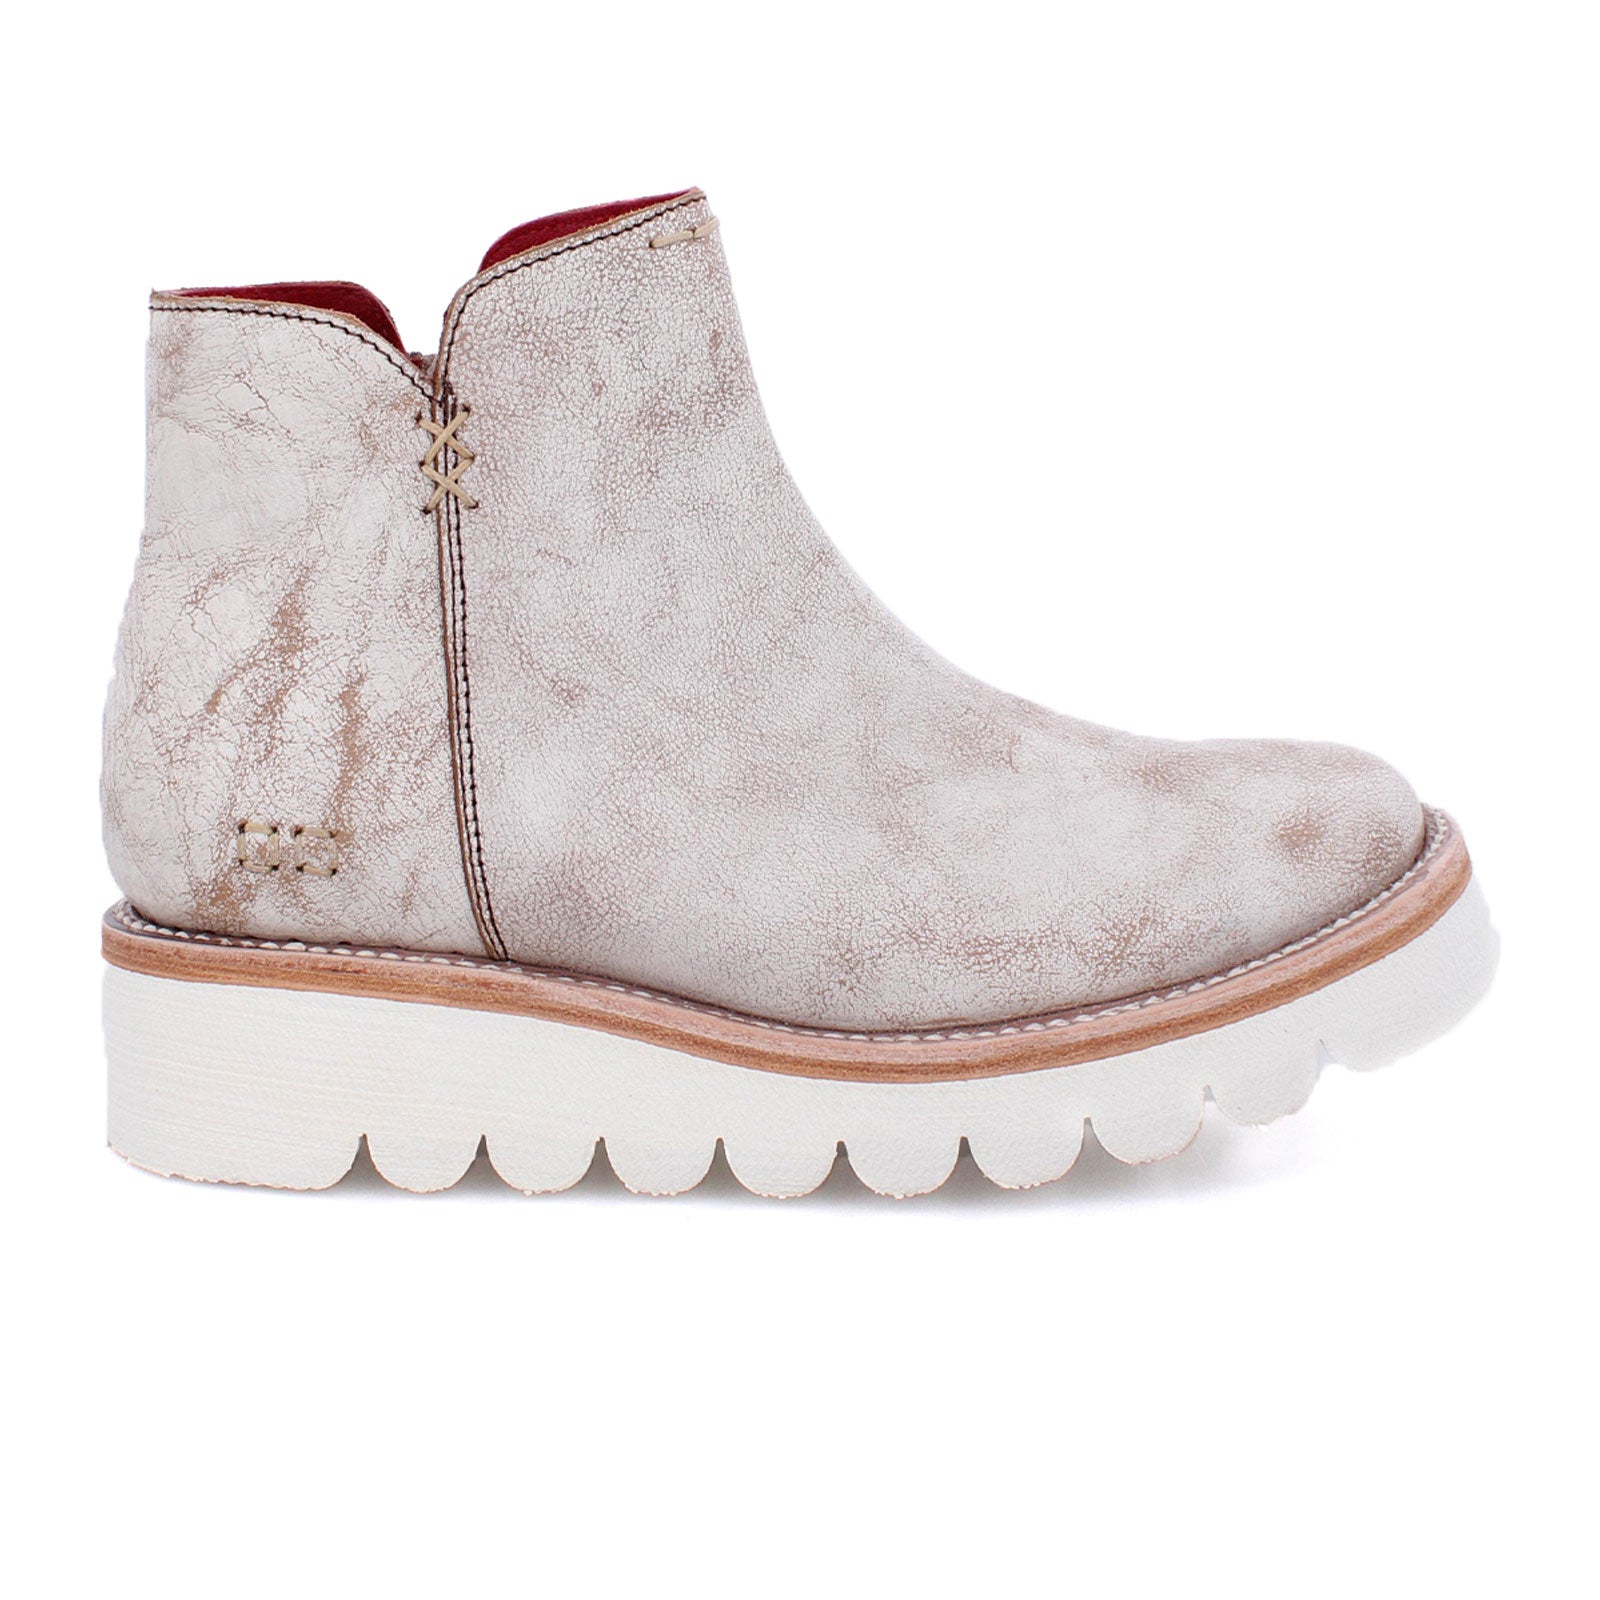 Bed Stu Lydyi Ankle Boot (Women) - Nectar Lux